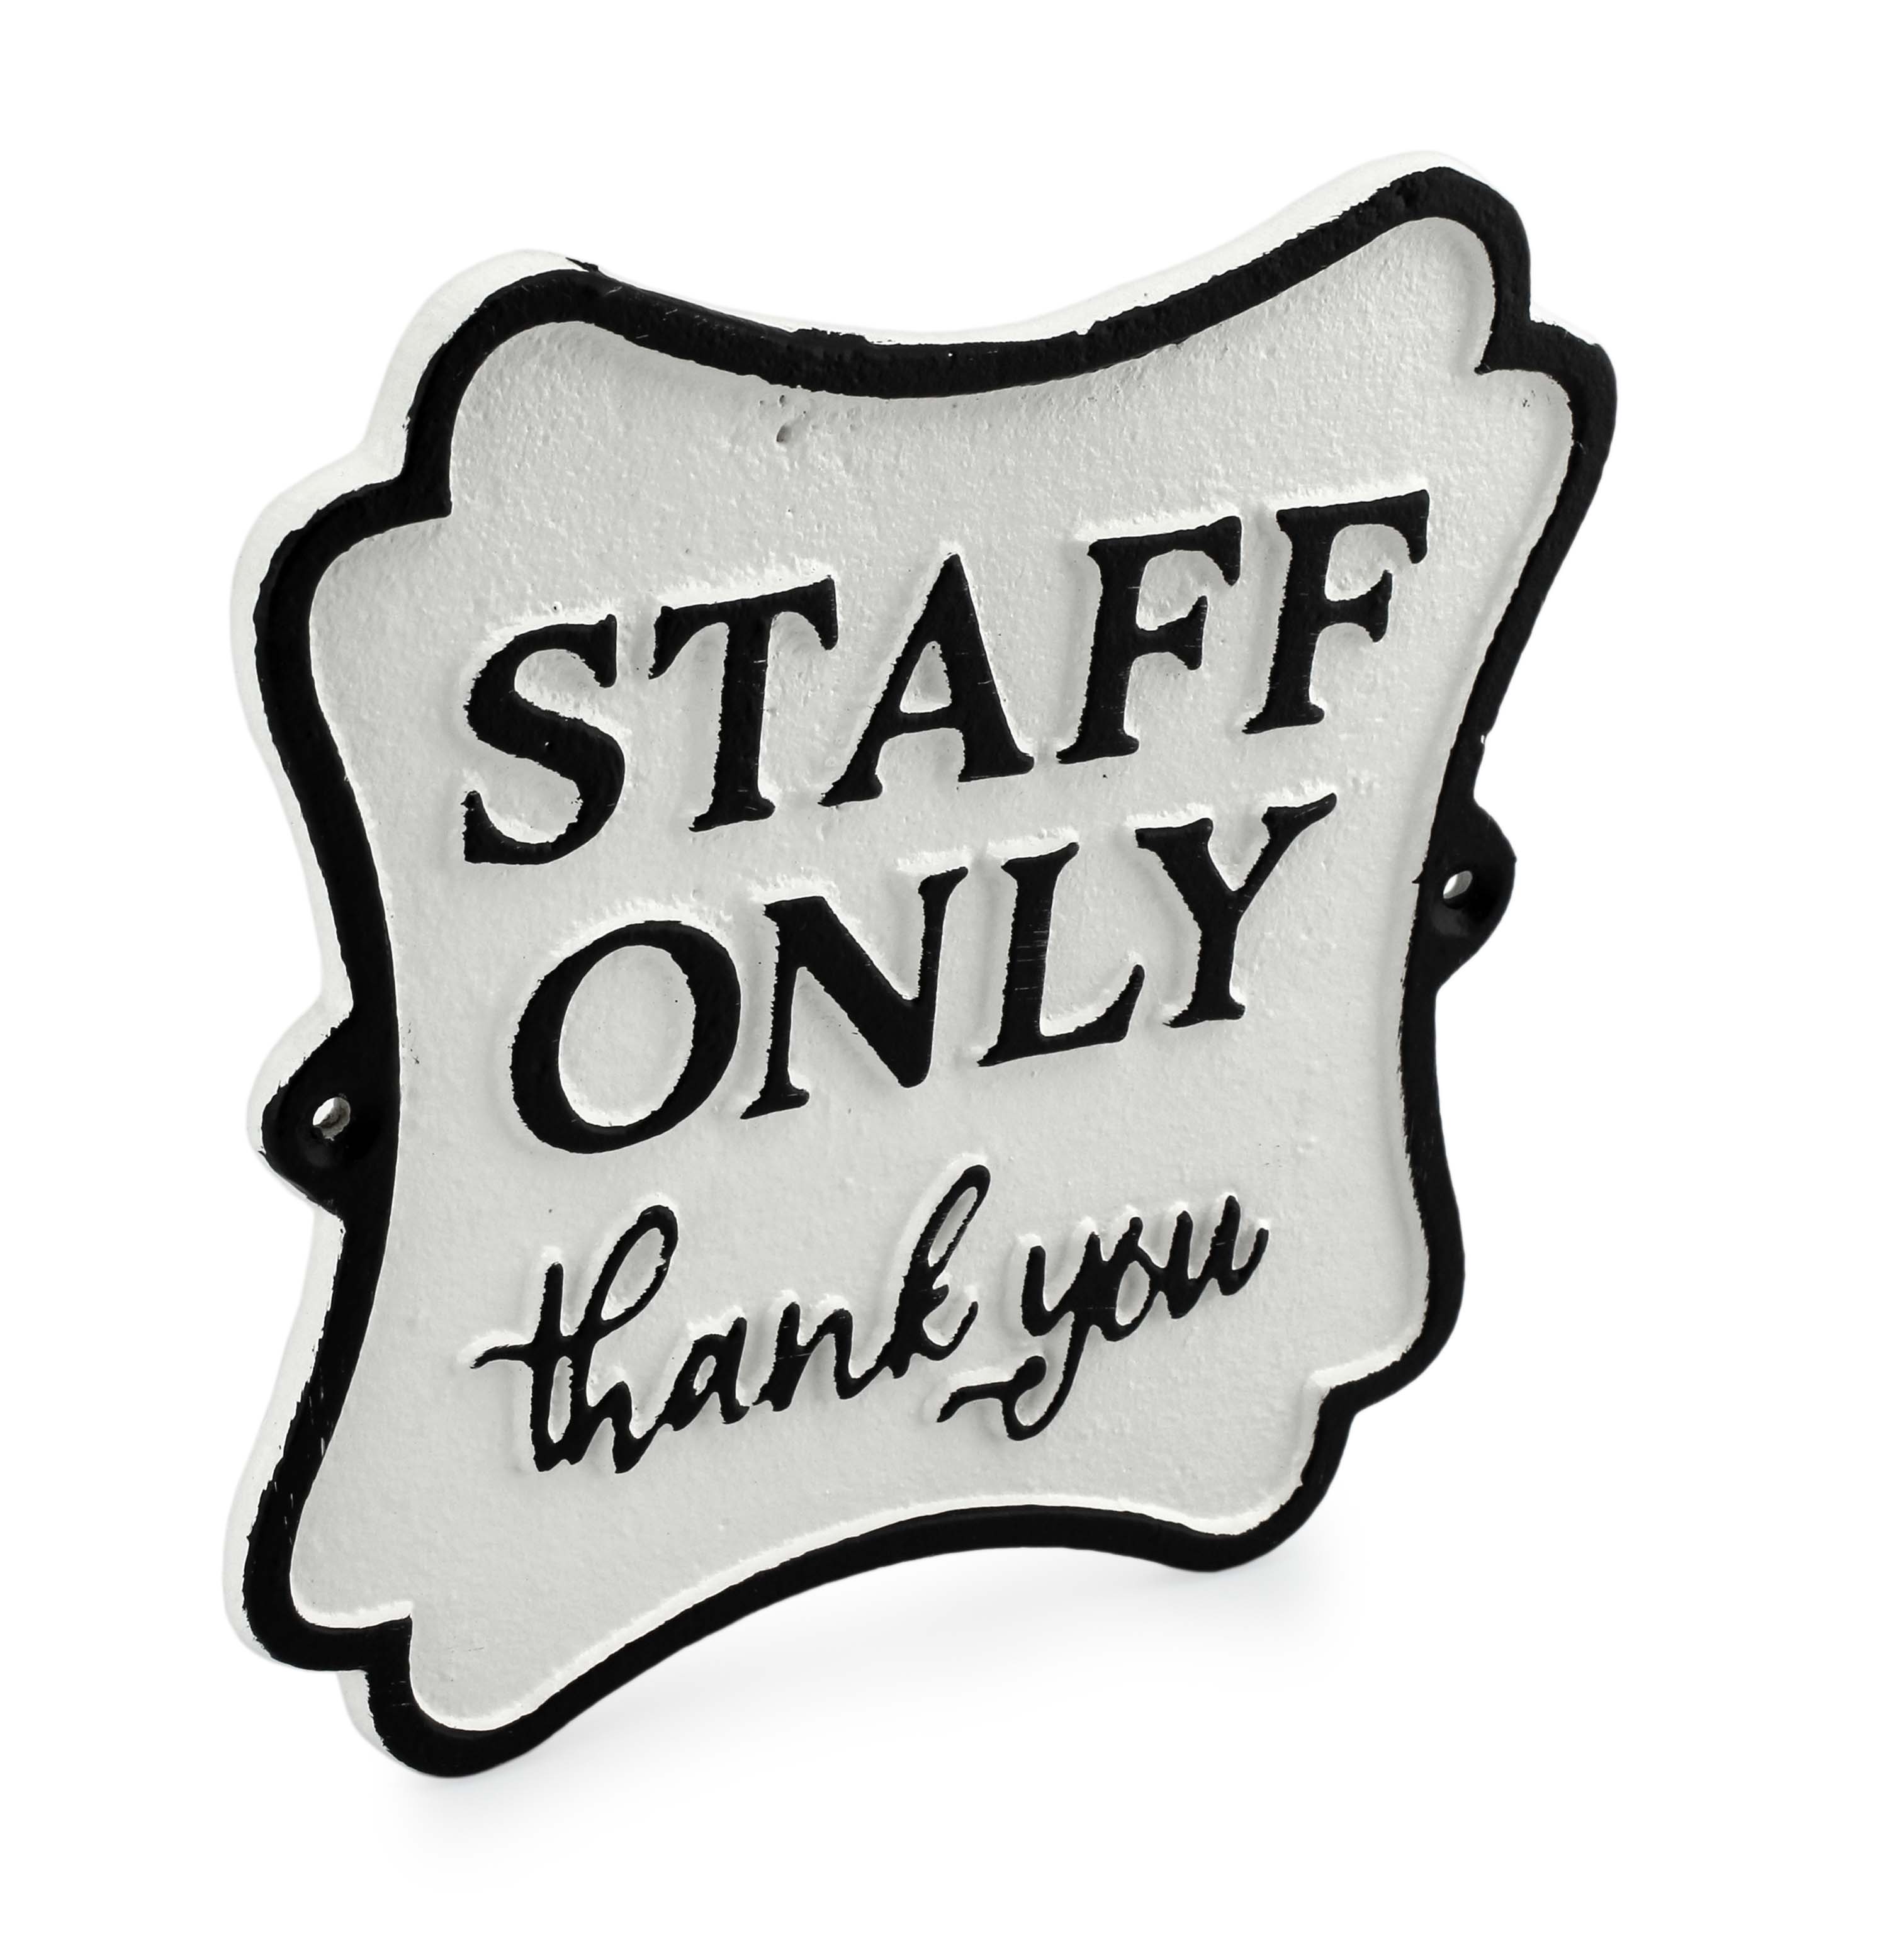 AuldHome Cast Iron Staff Only Sign, Business Door Sign for Employees Only Area - image 3 of 5